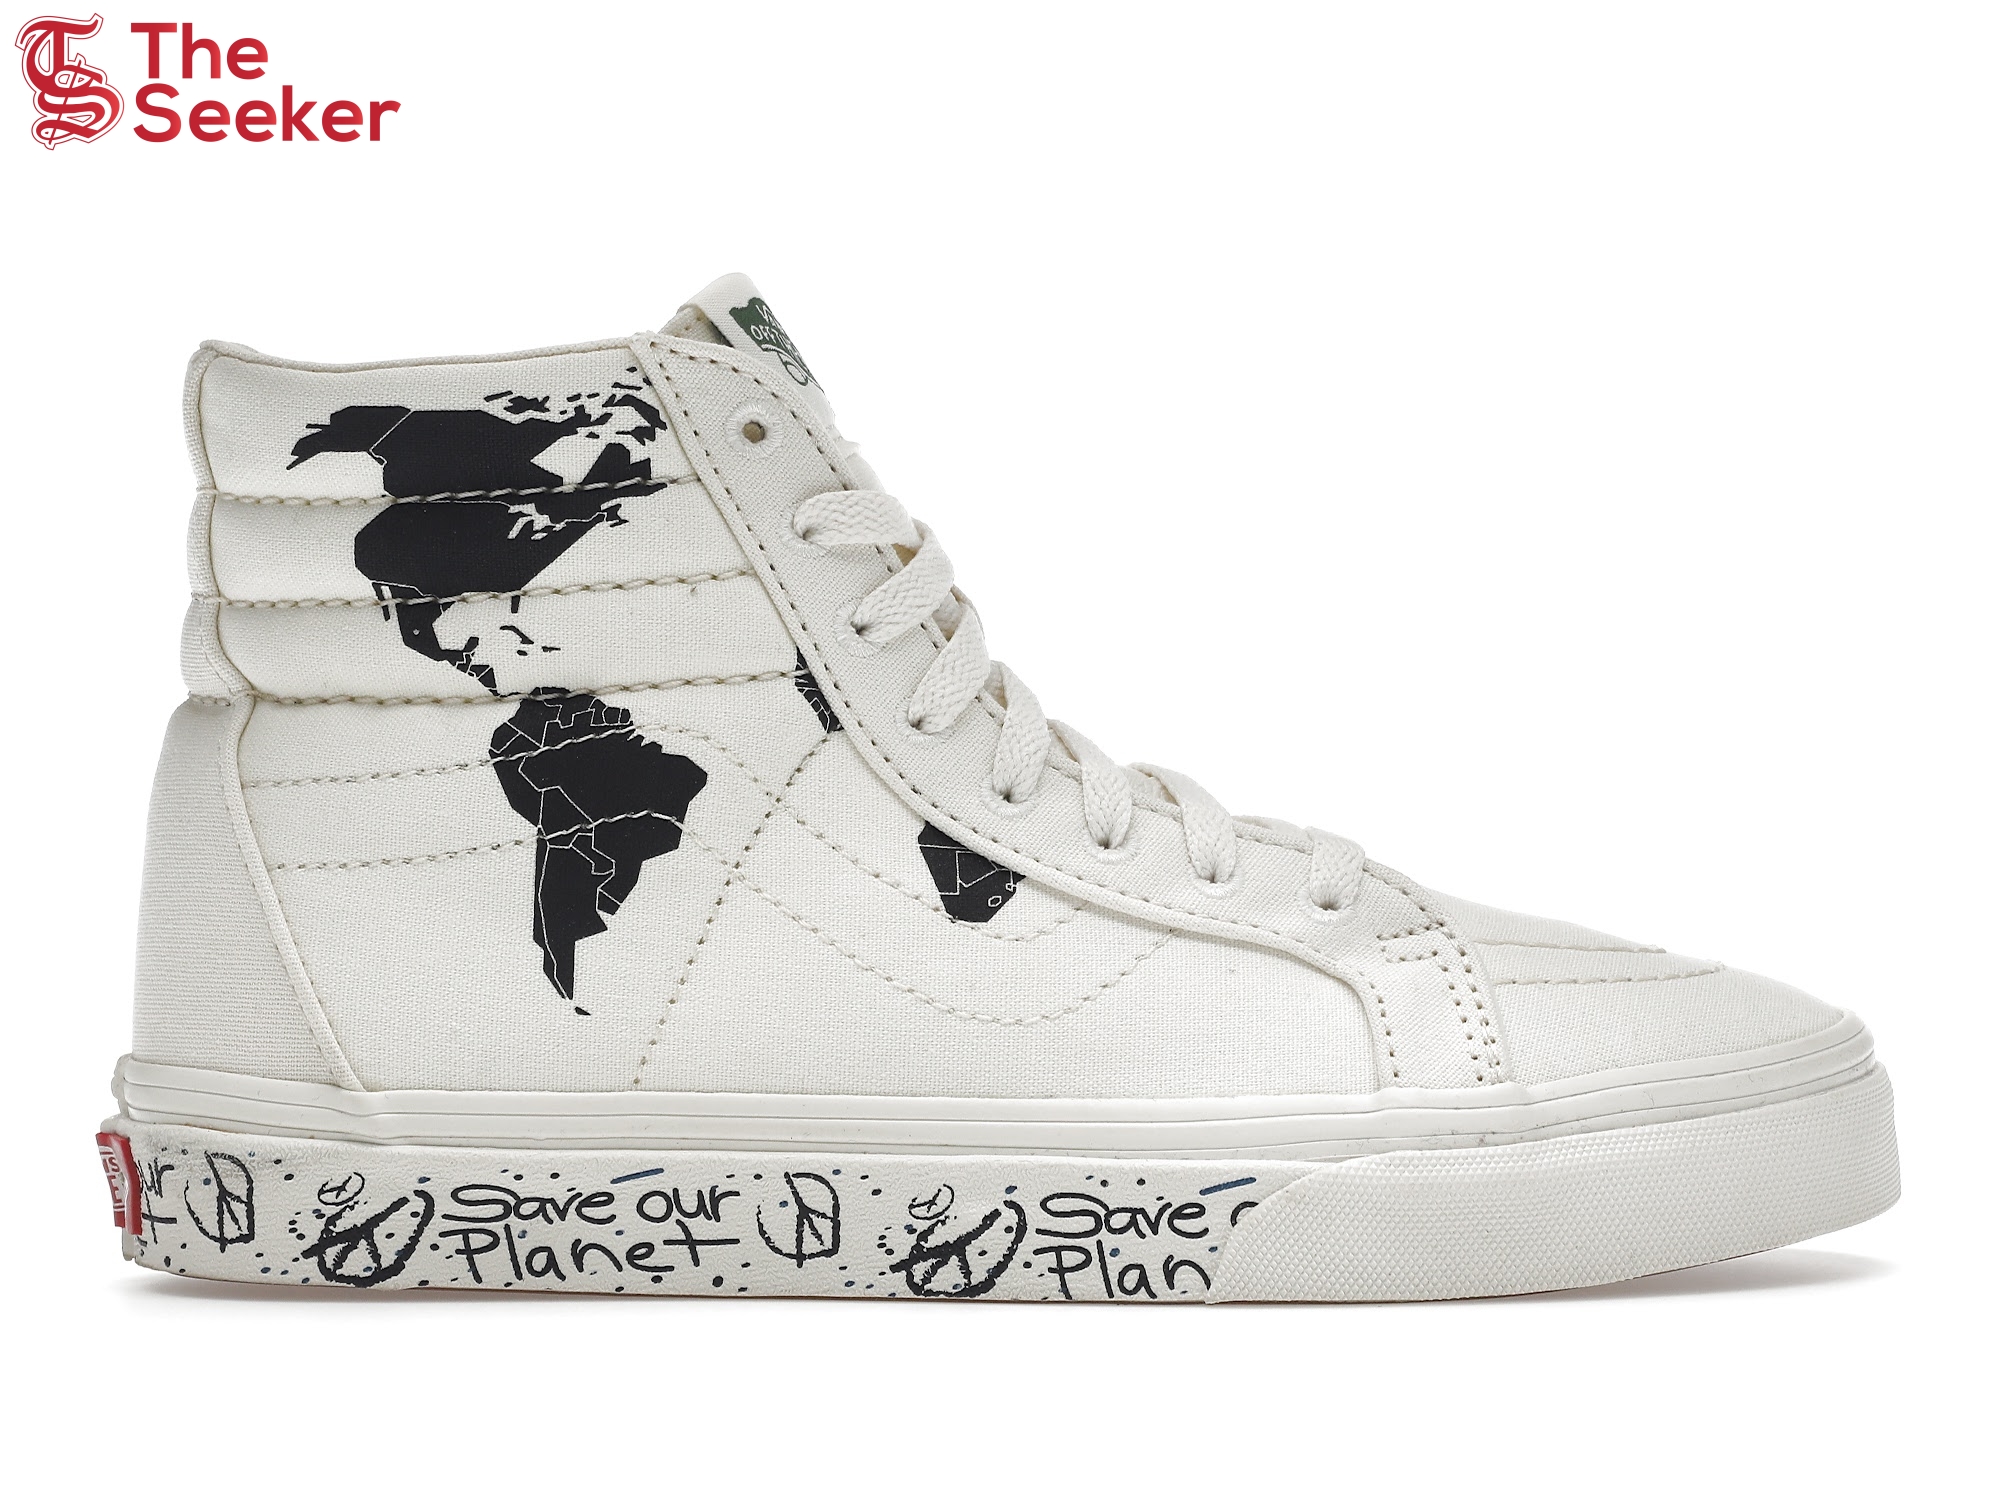 Vans Sk8-Hi Re-Issue Save Our Planet White Black